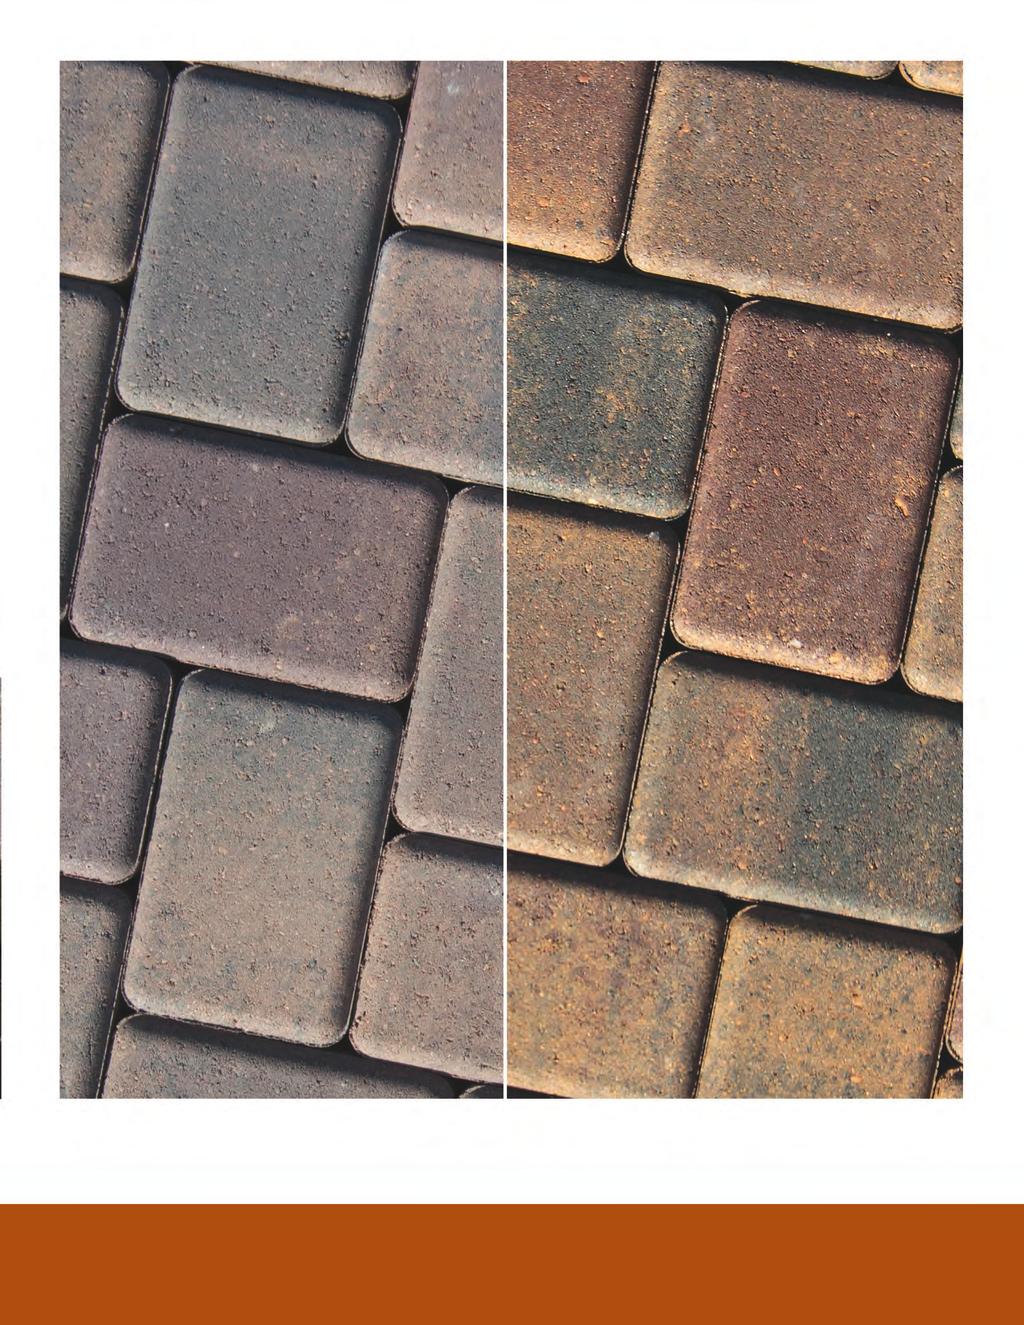 protect your investment Natural-look sealers help keep pavers looking like the day they were